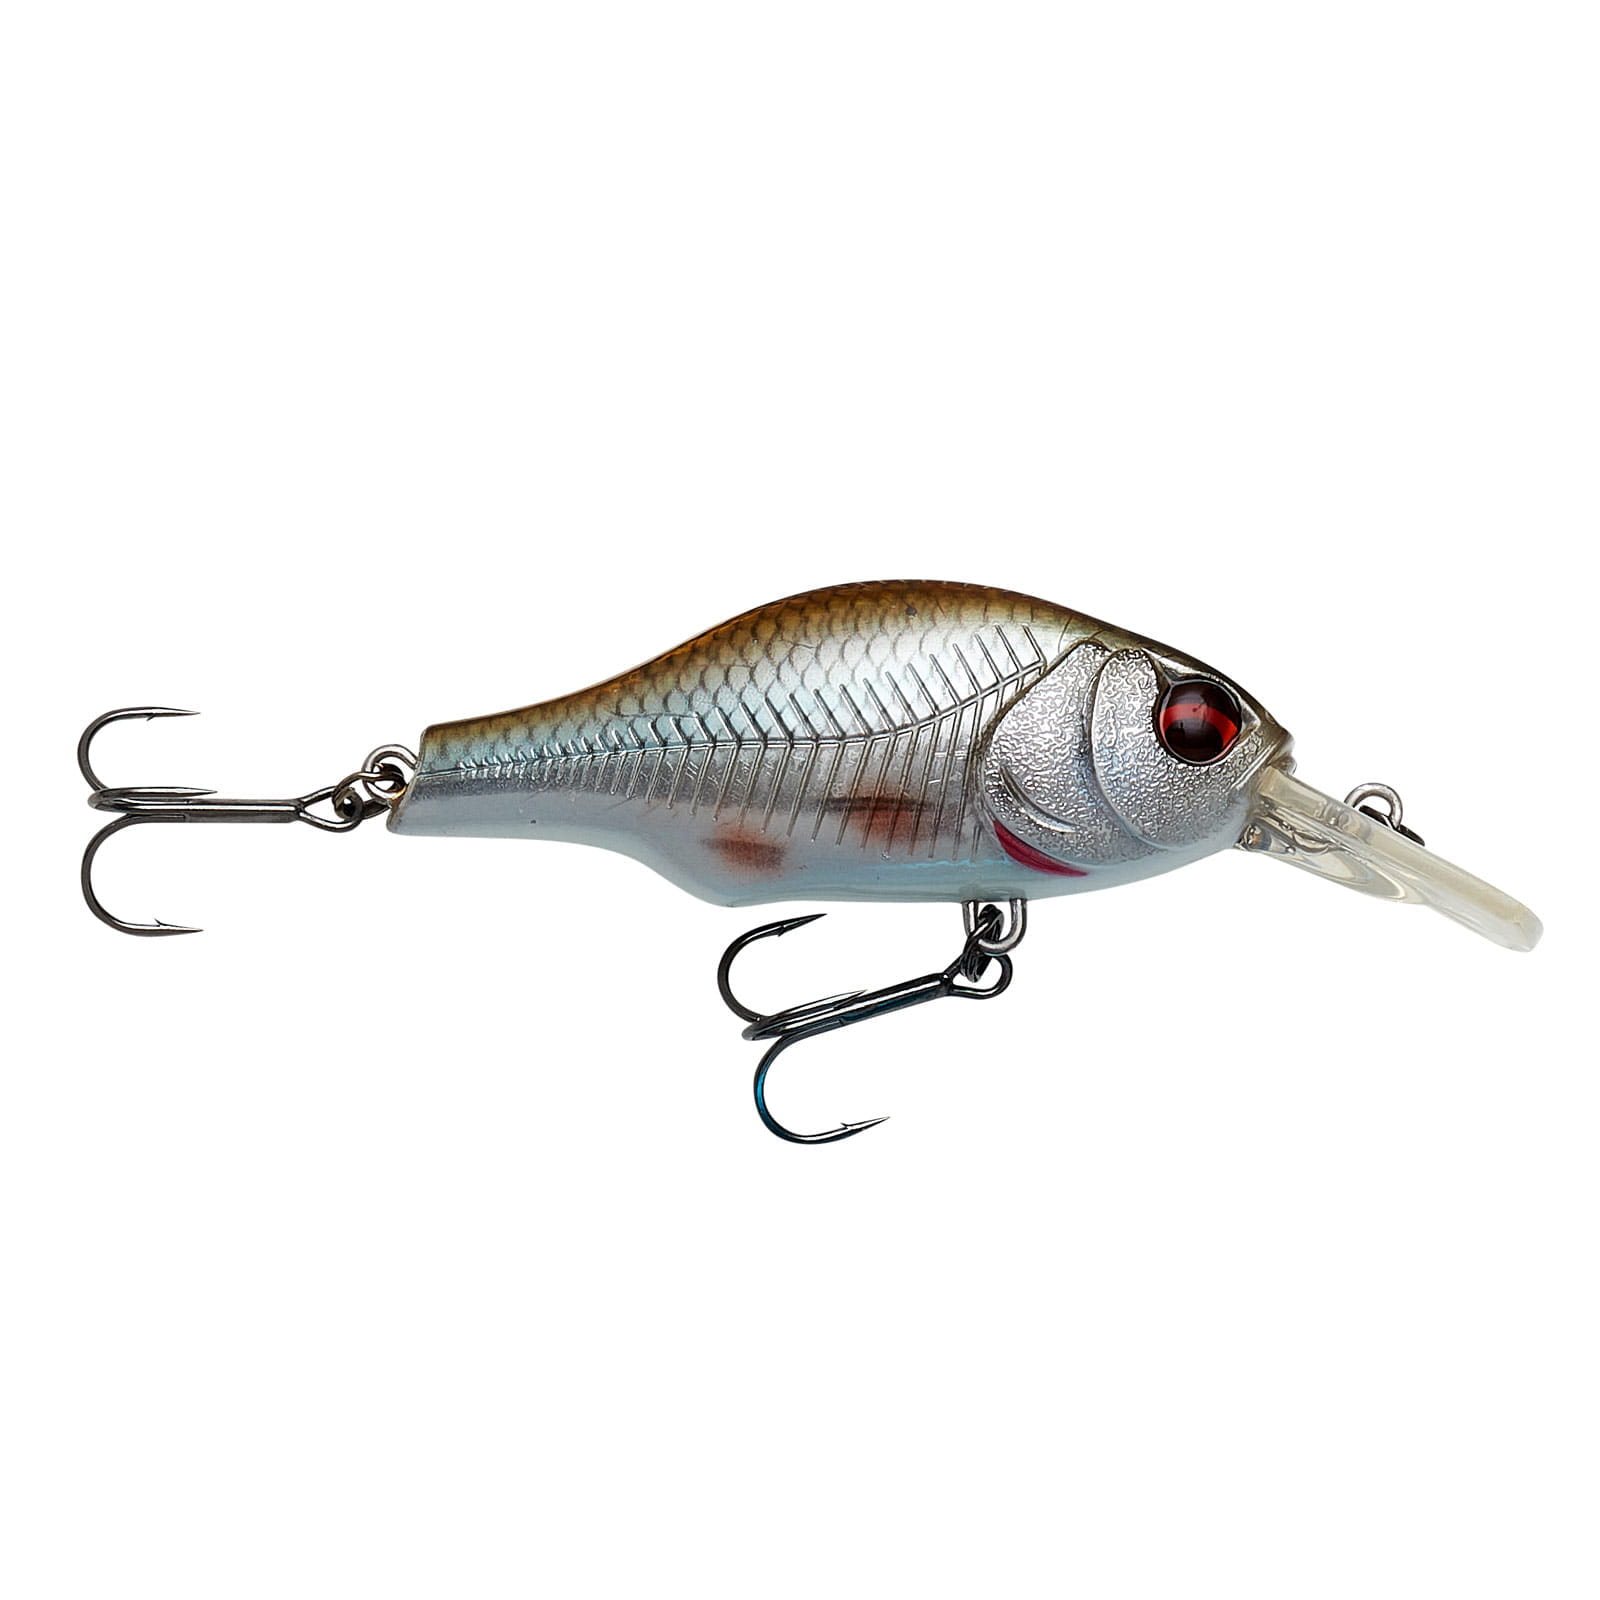 (4)Floating Wobbler Fishing Lure High Resolution Body Details Good Water